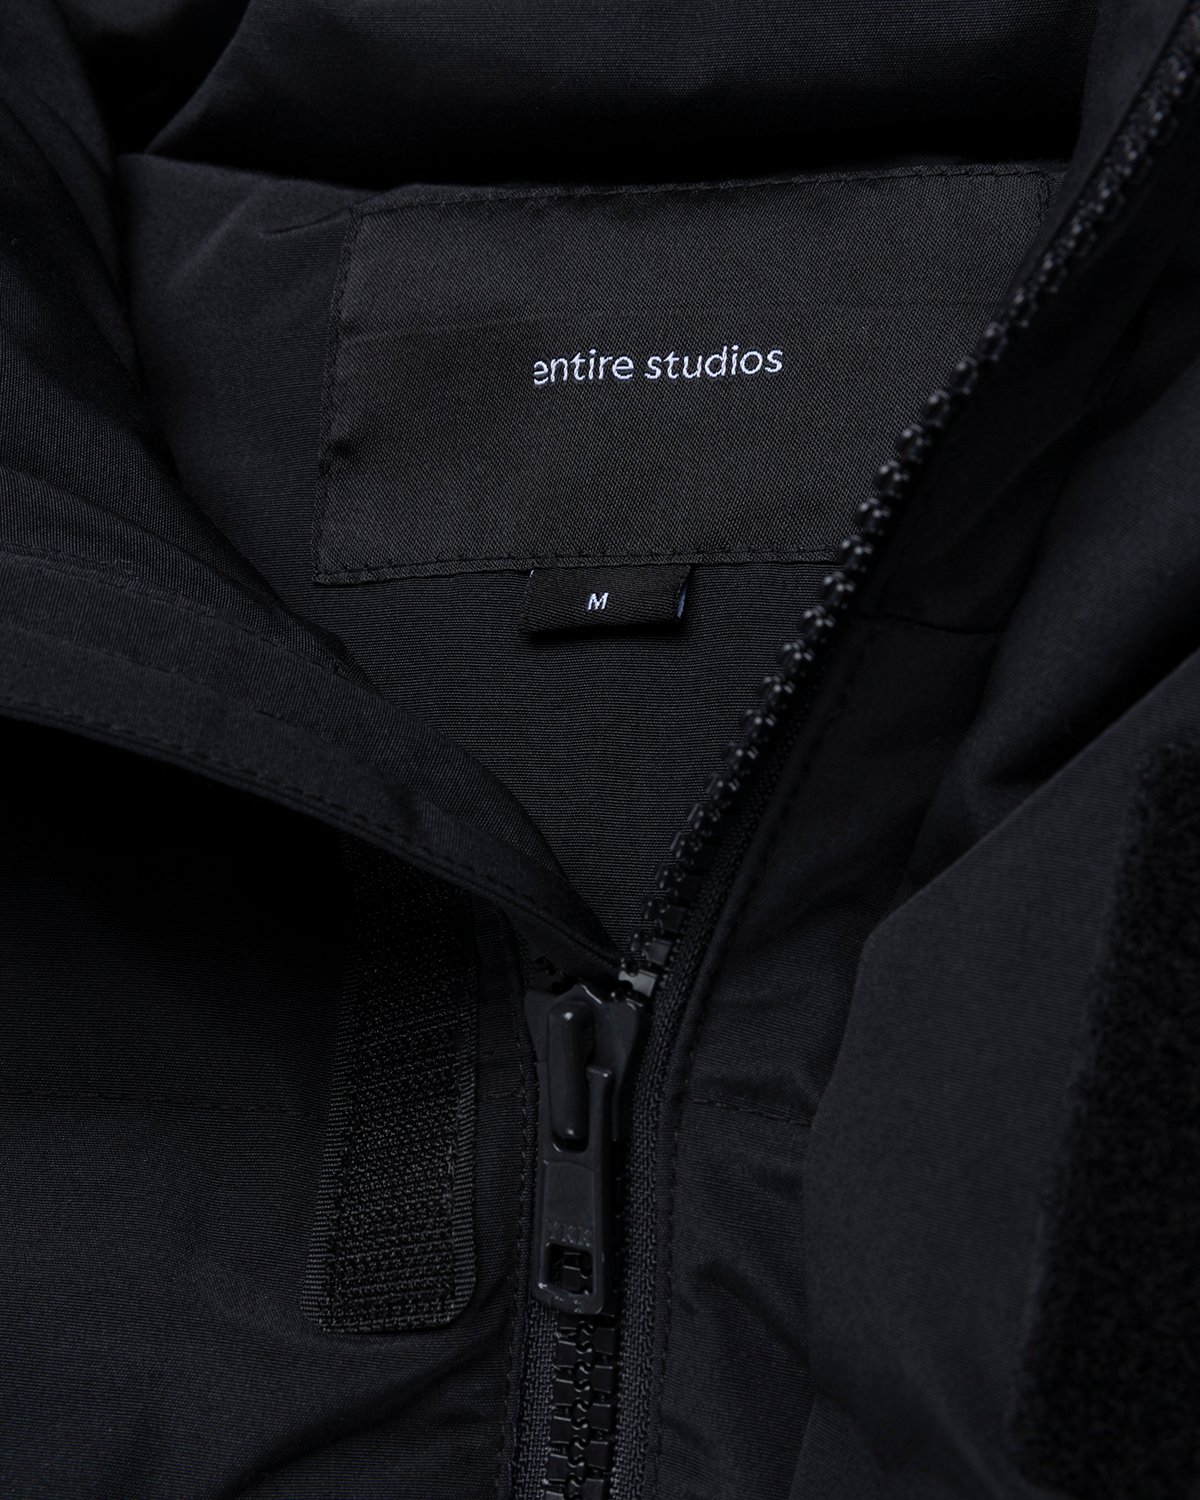 Entire Studios - PFD Puffer Jacket Soot - Clothing - Black - Image 7